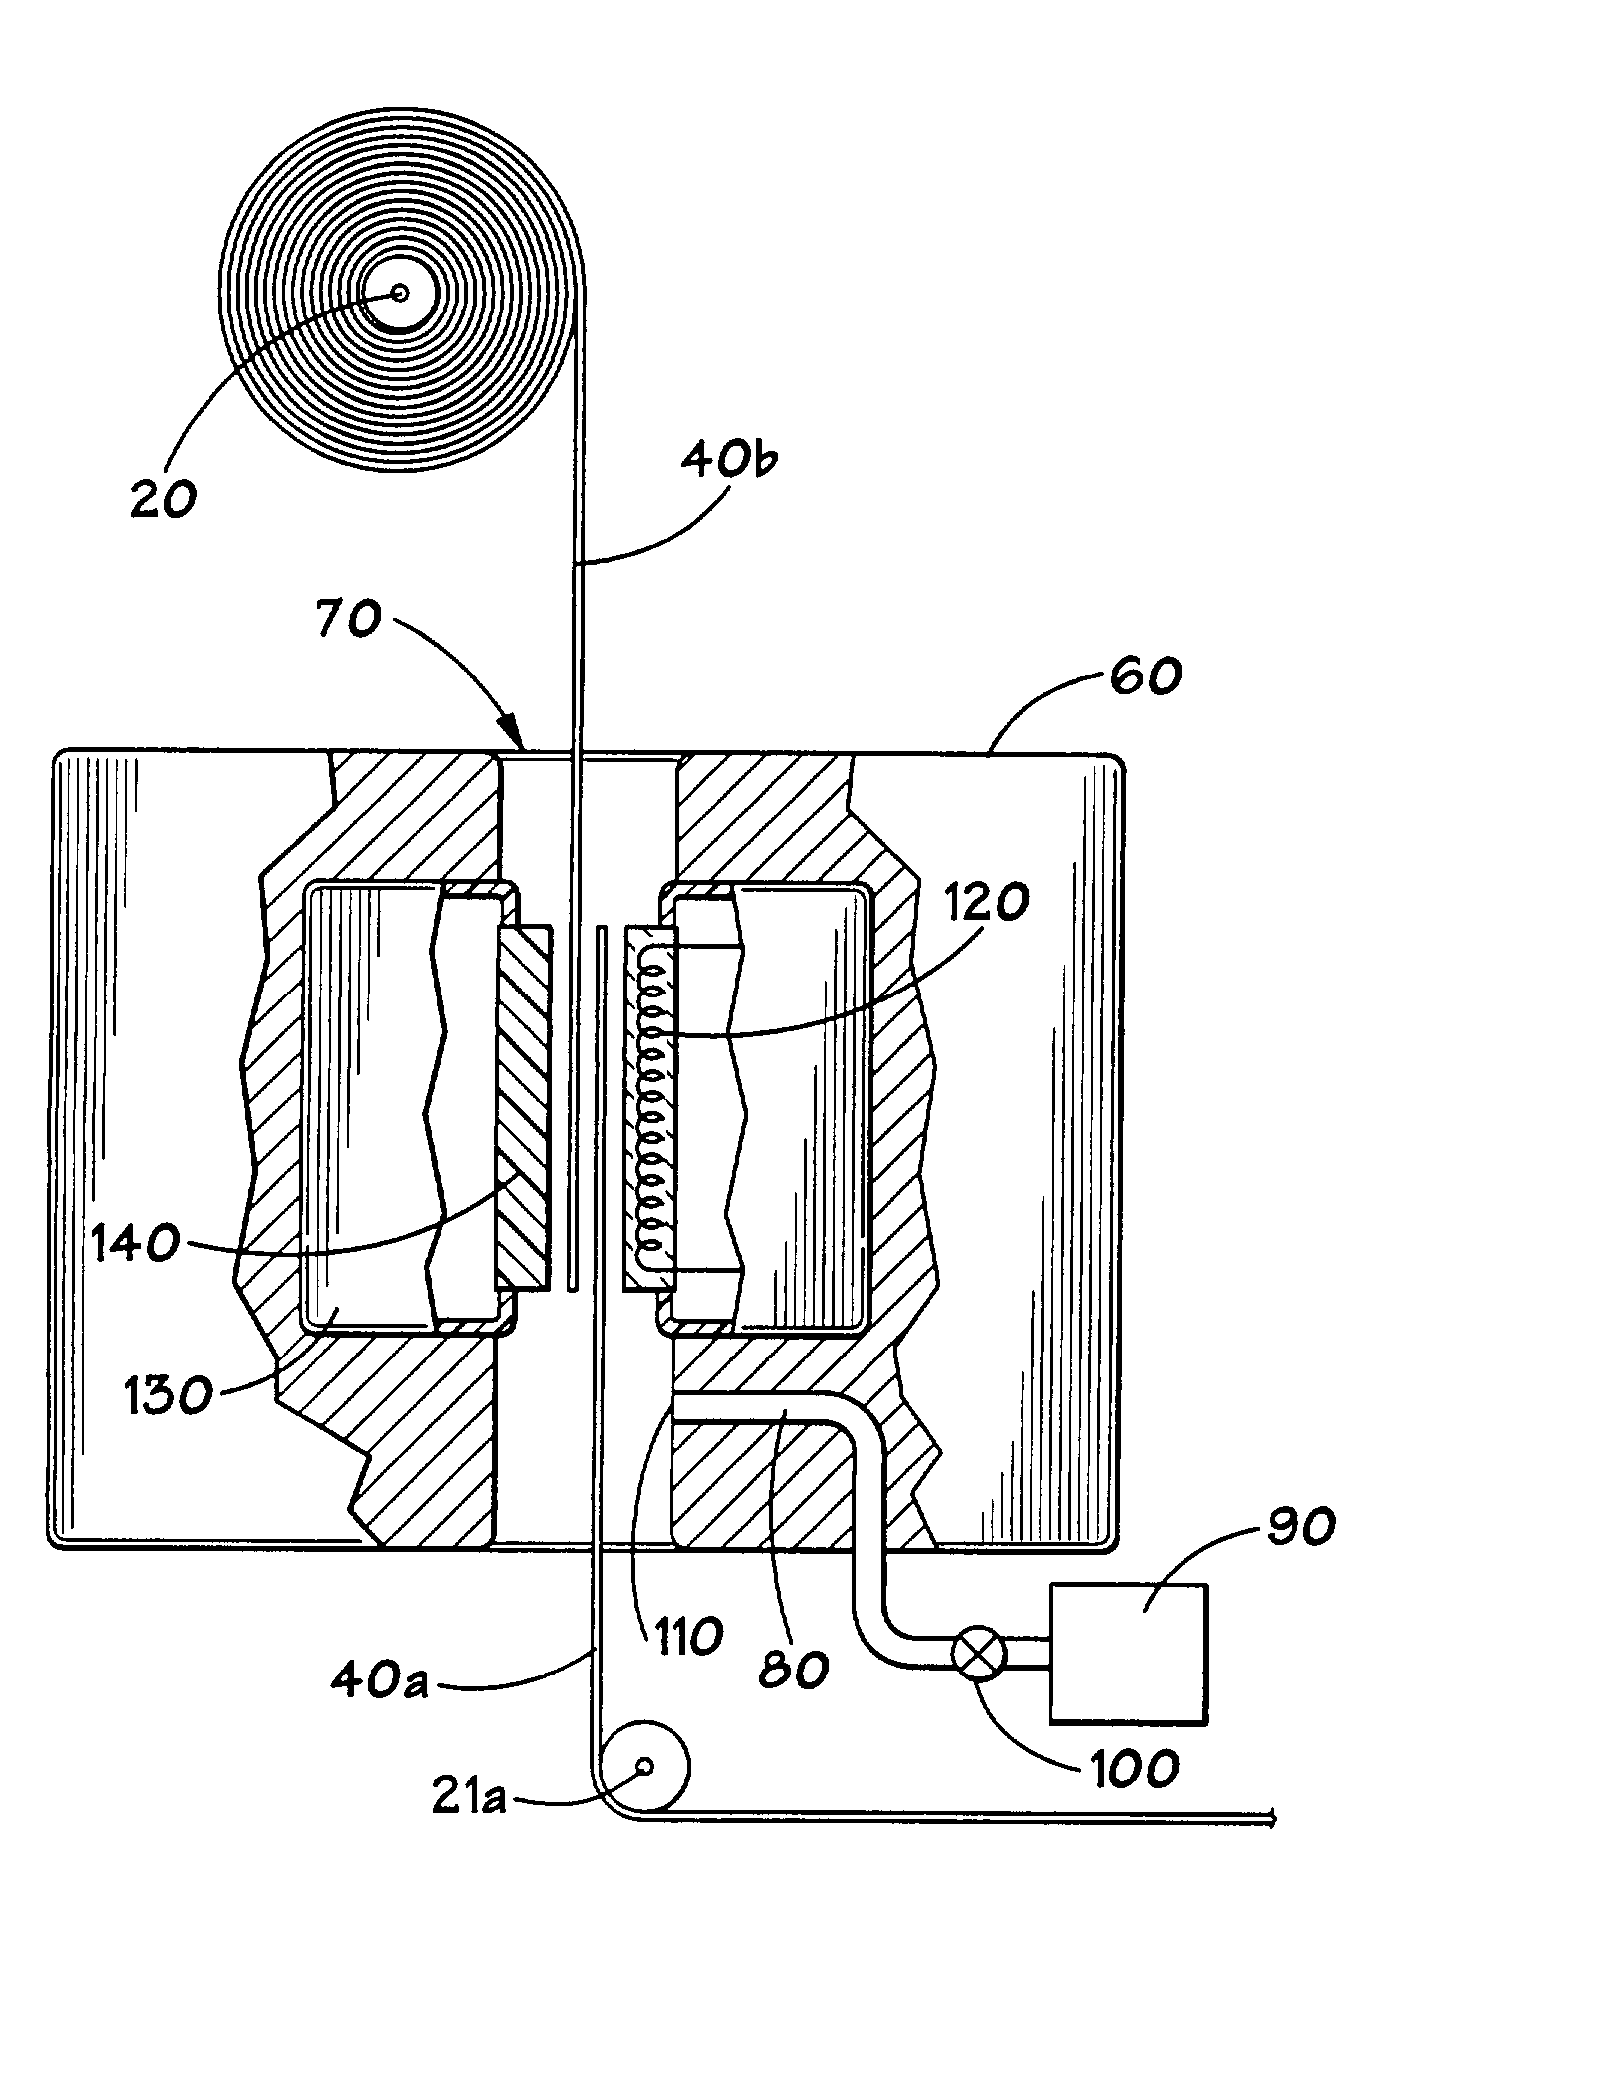 Method for attaching web based polishing materials together on a polishing tool